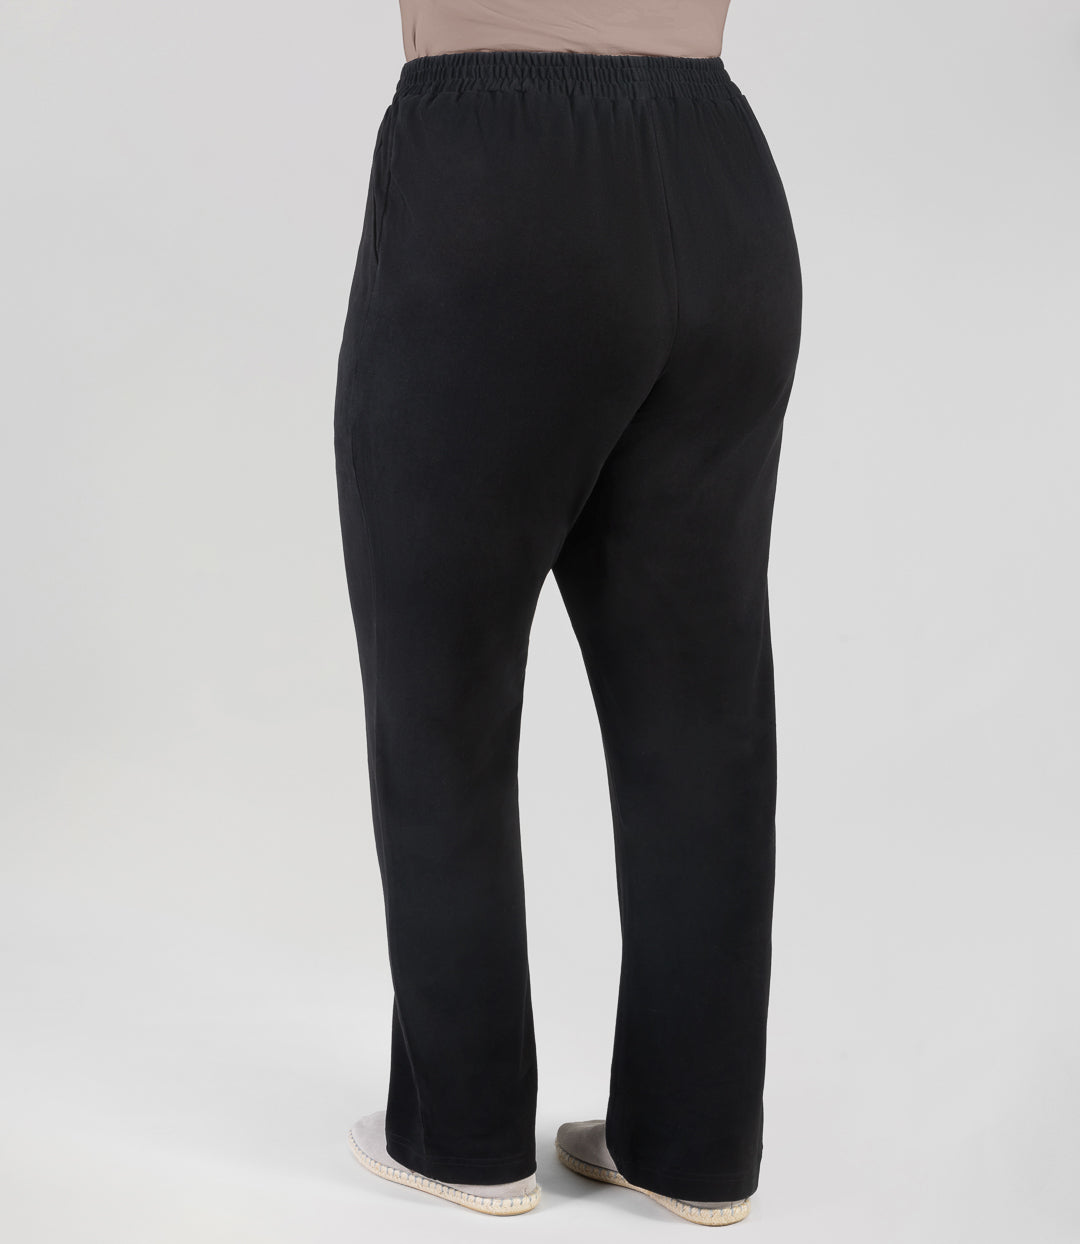 Bottom half back view of plus sized woman wearing Junoactives Legacy Cotton Casual Pant with pockets. These pants are full length and pockets on each side in solid black.